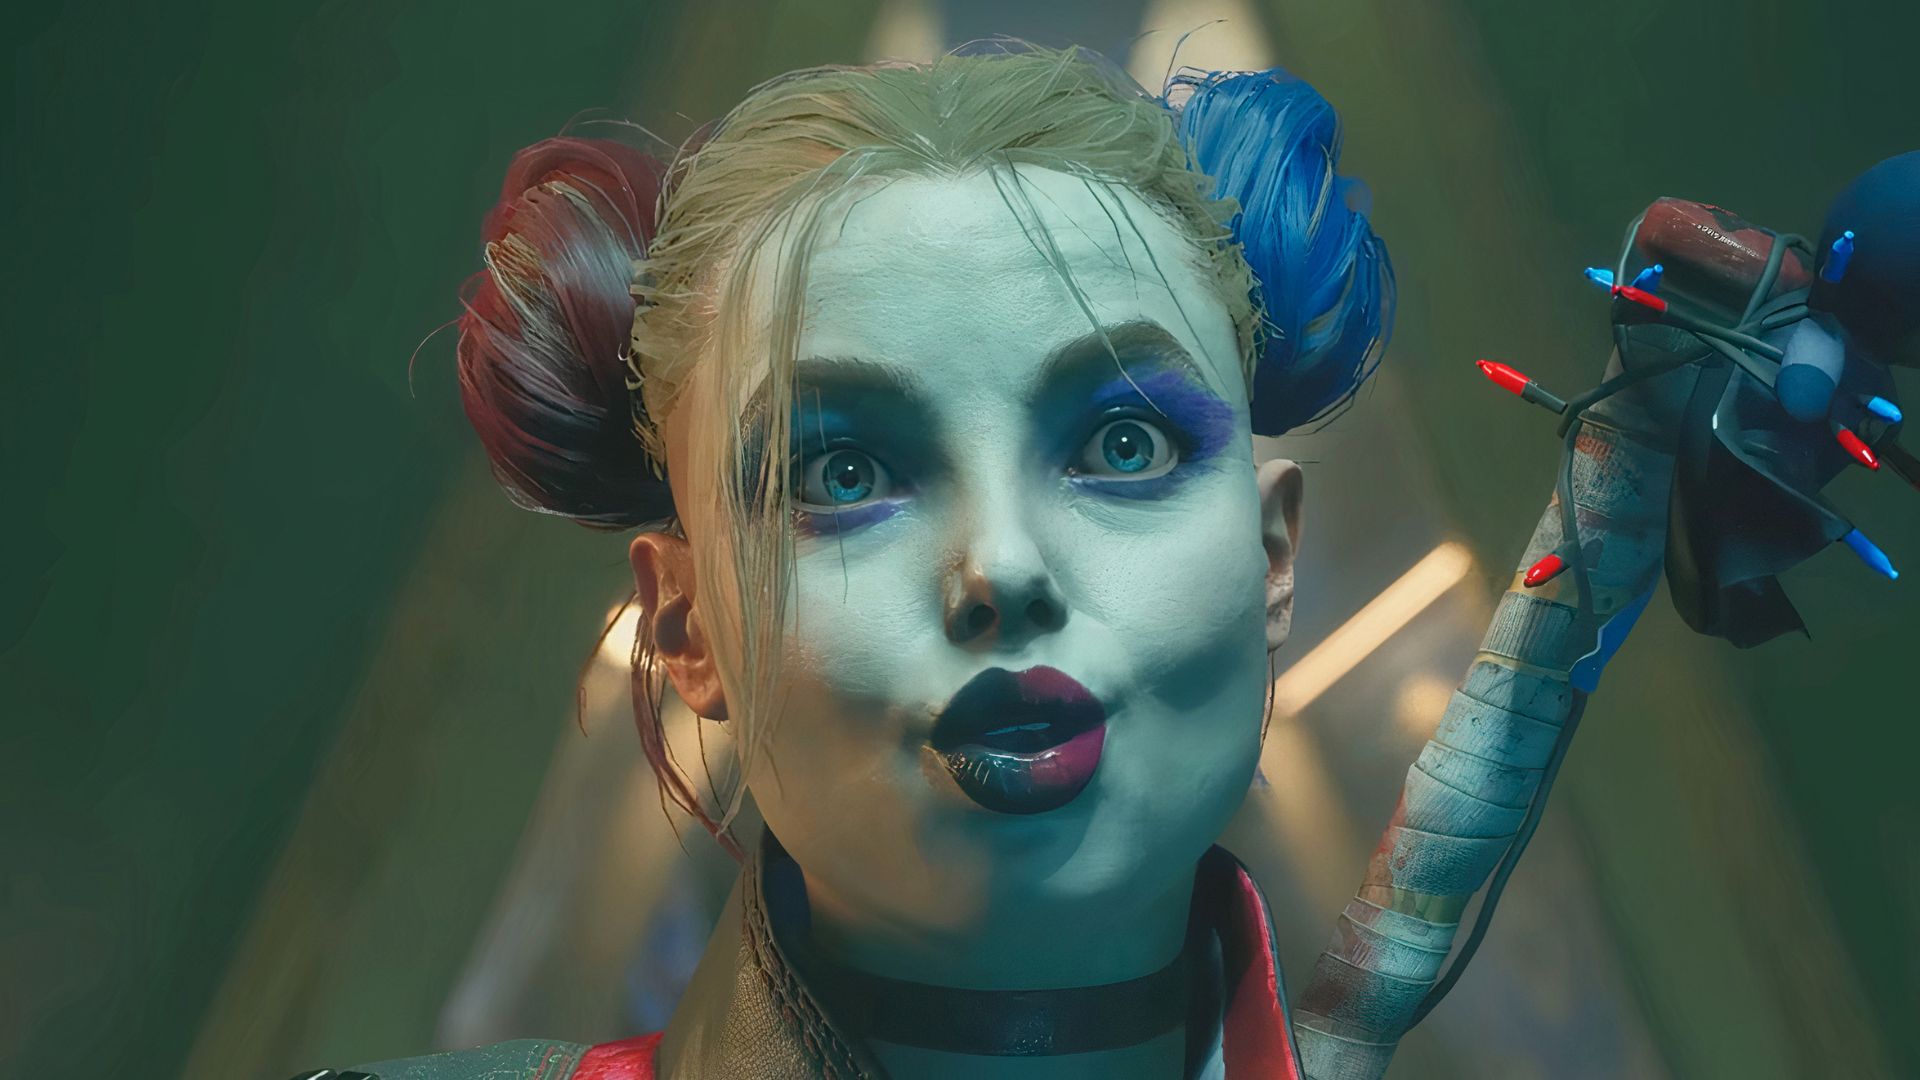 Suicide Squad's day one Steam peak less than half of Marvel's Avengers